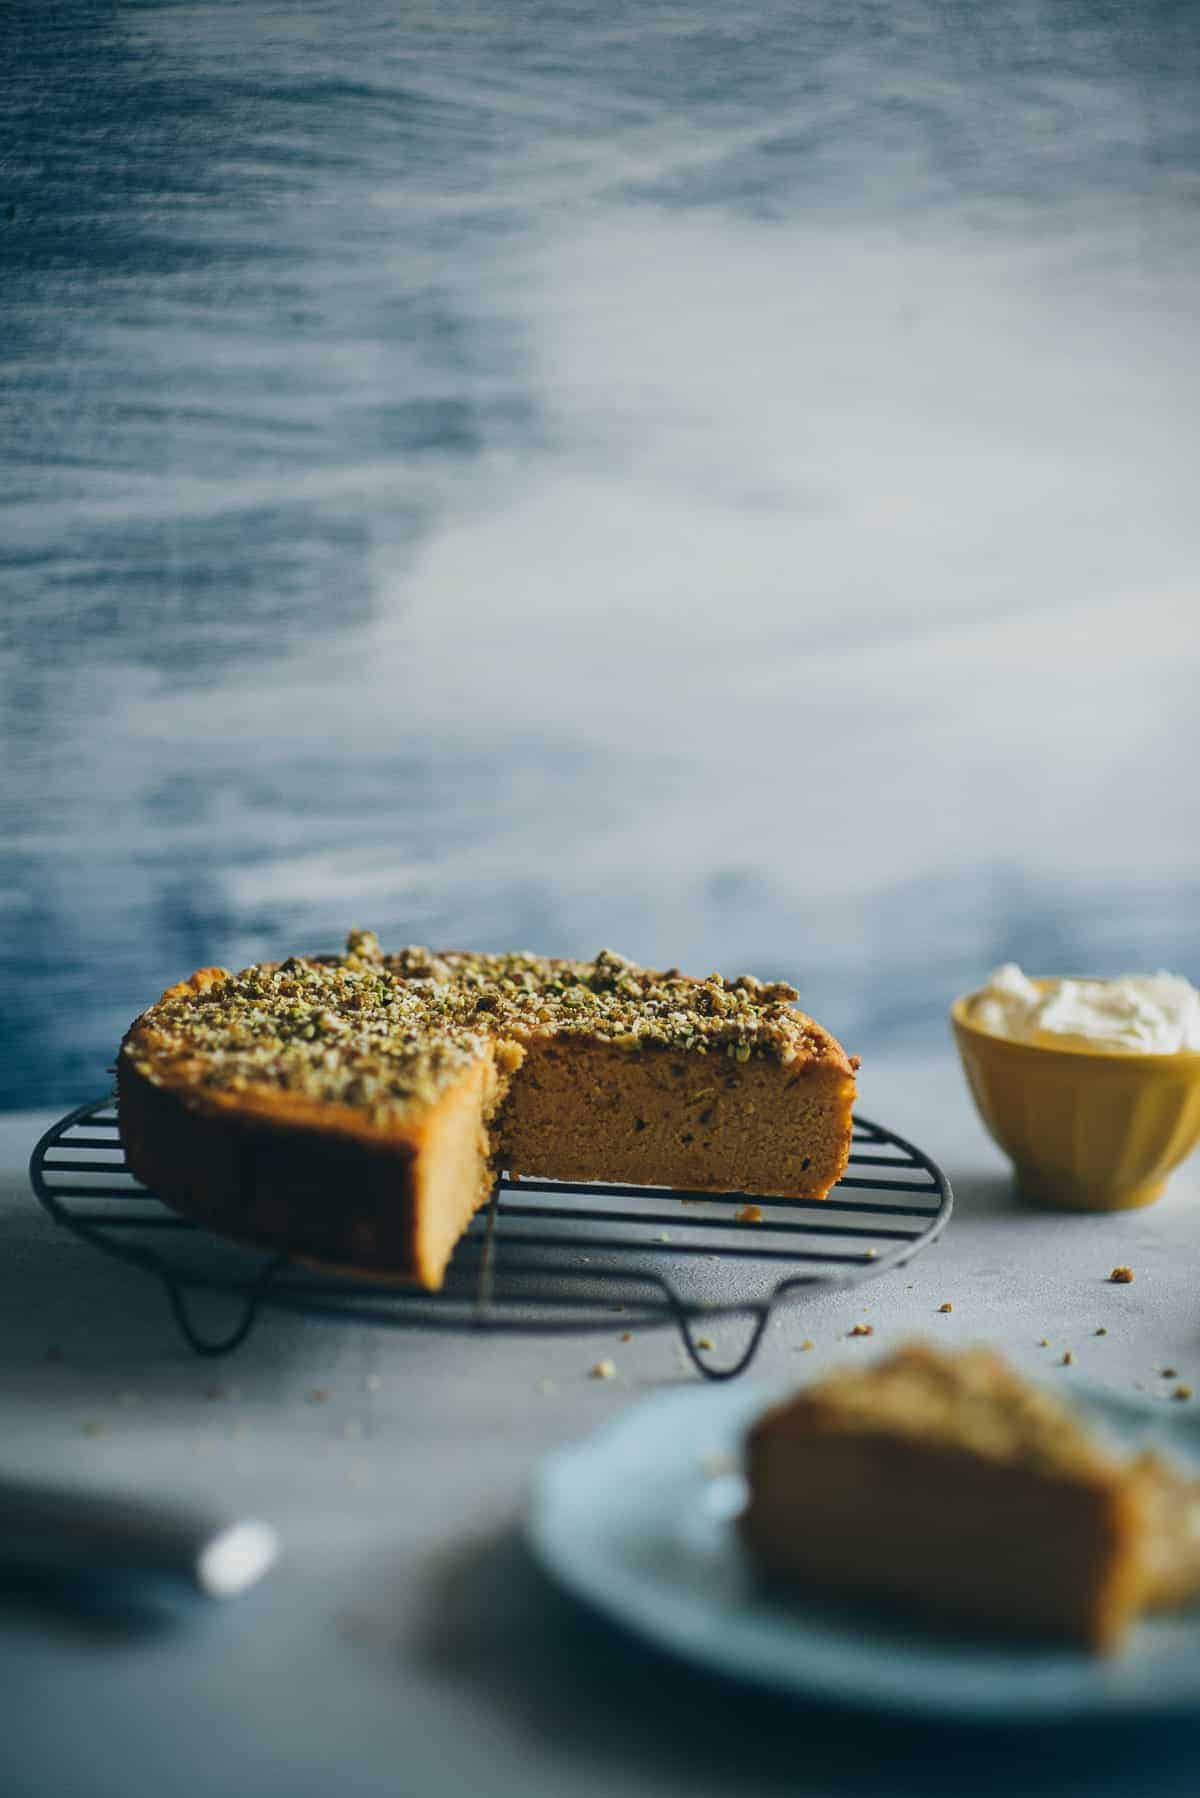 Claudia Roden's orange and almond cake